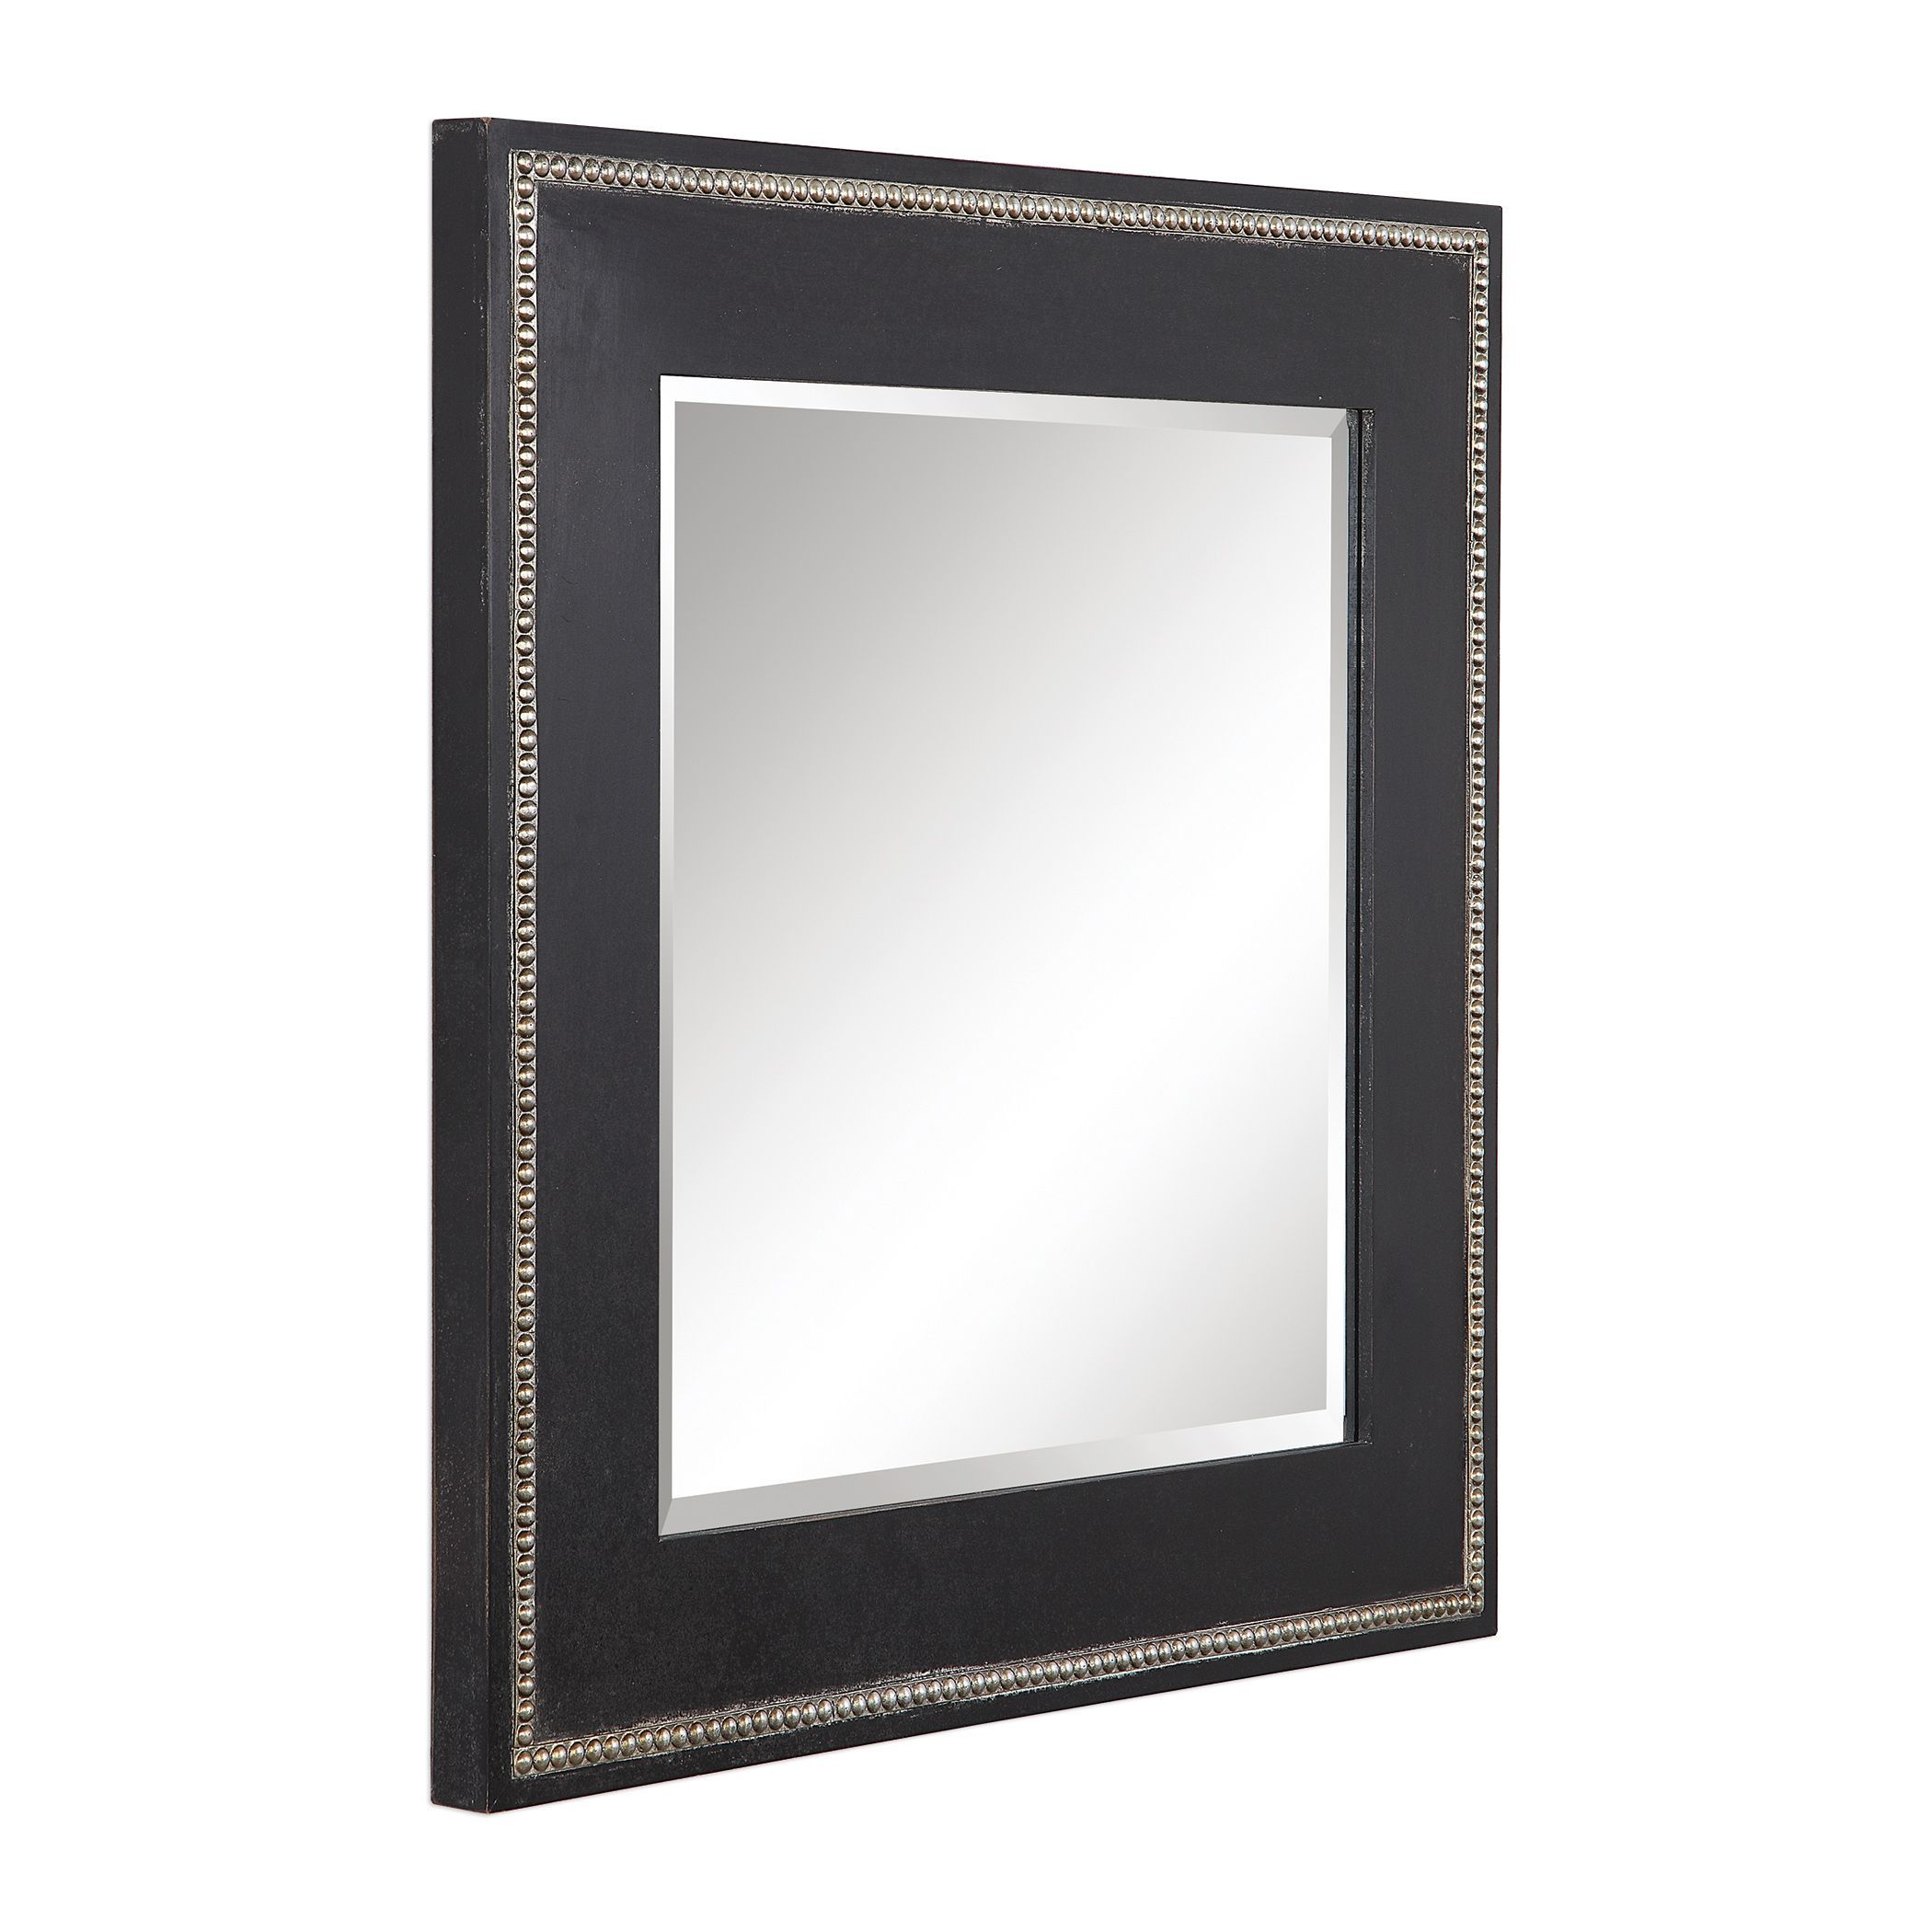 Large Black Square Beveled Wall Mirror Contemporary Style Traditional Intended For Square Oversized Wall Mirrors (View 14 of 15)